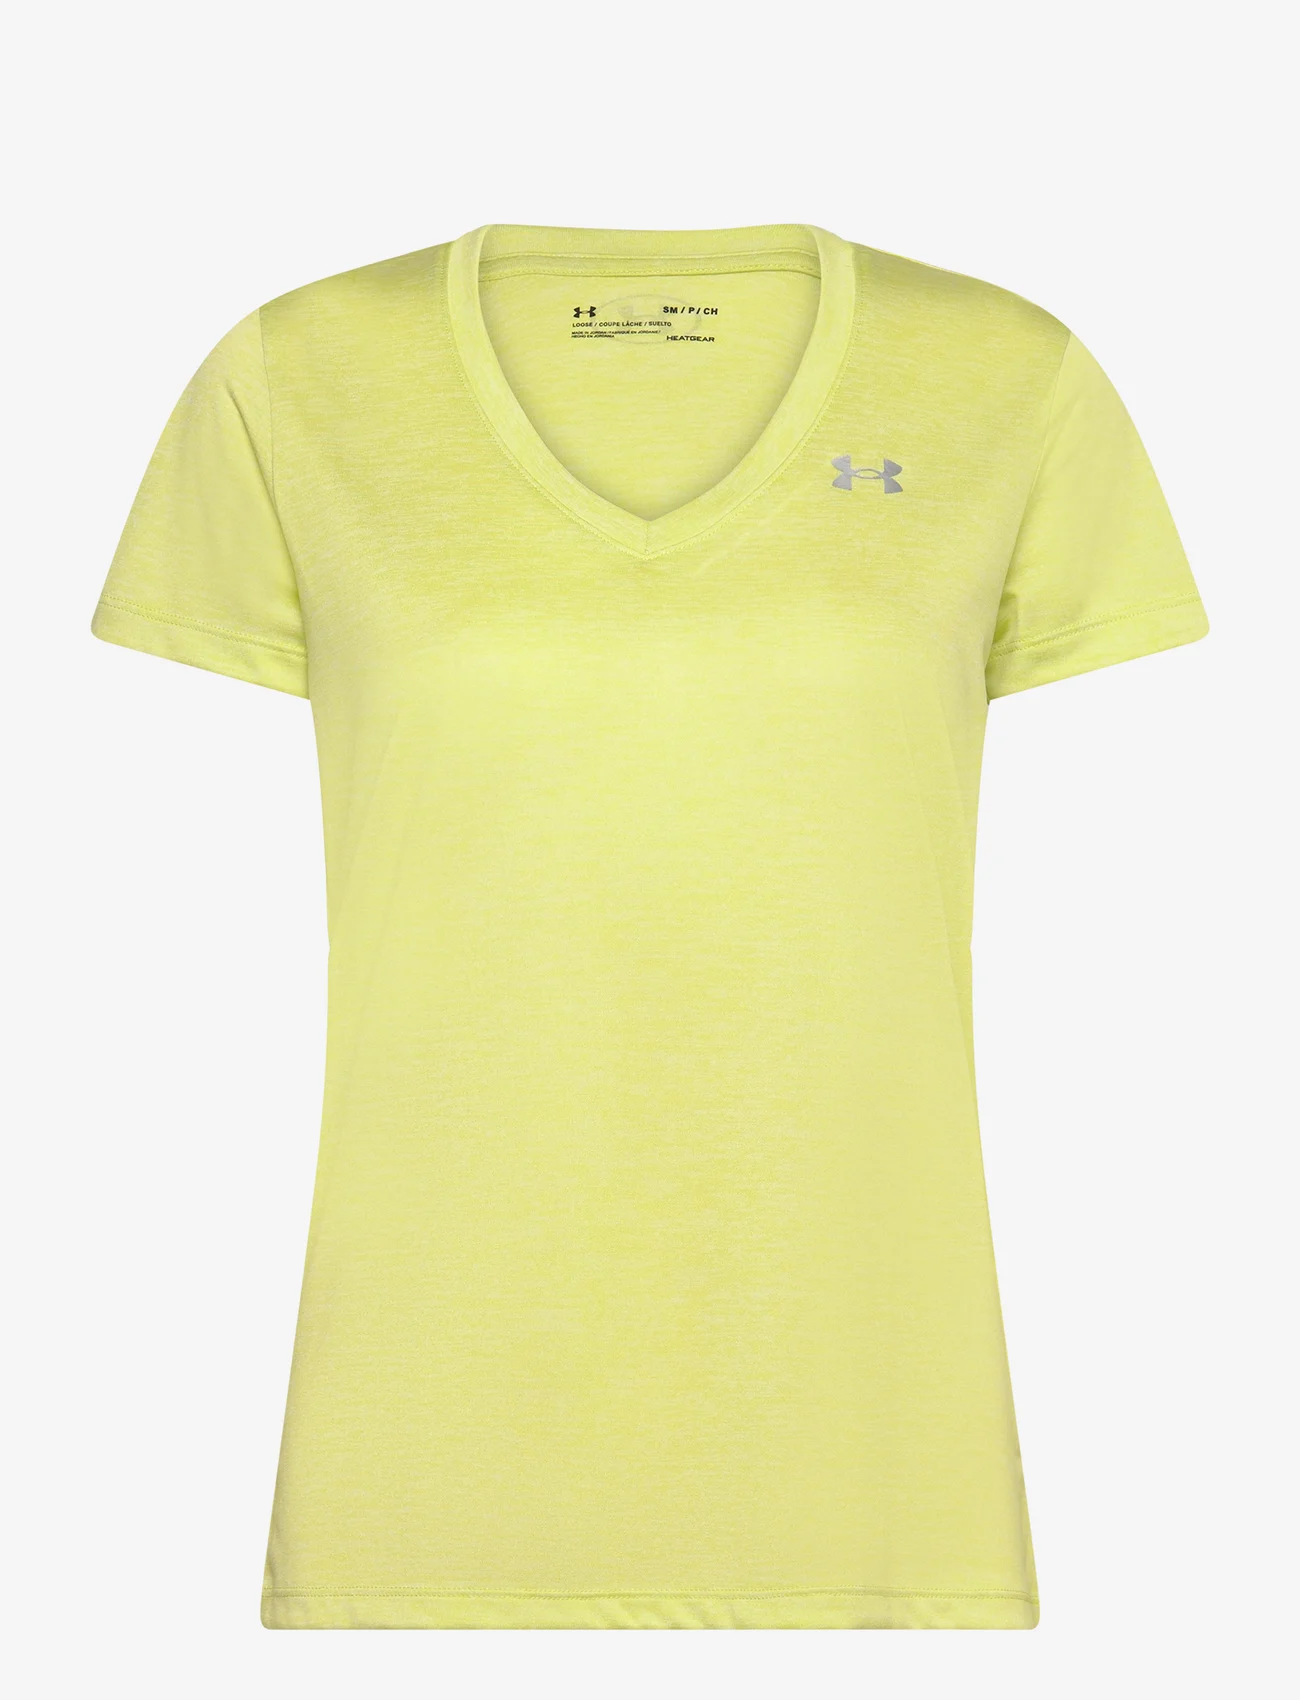 Under Armour - Tech SSV - Twist - t-shirts - lime yellow - 0